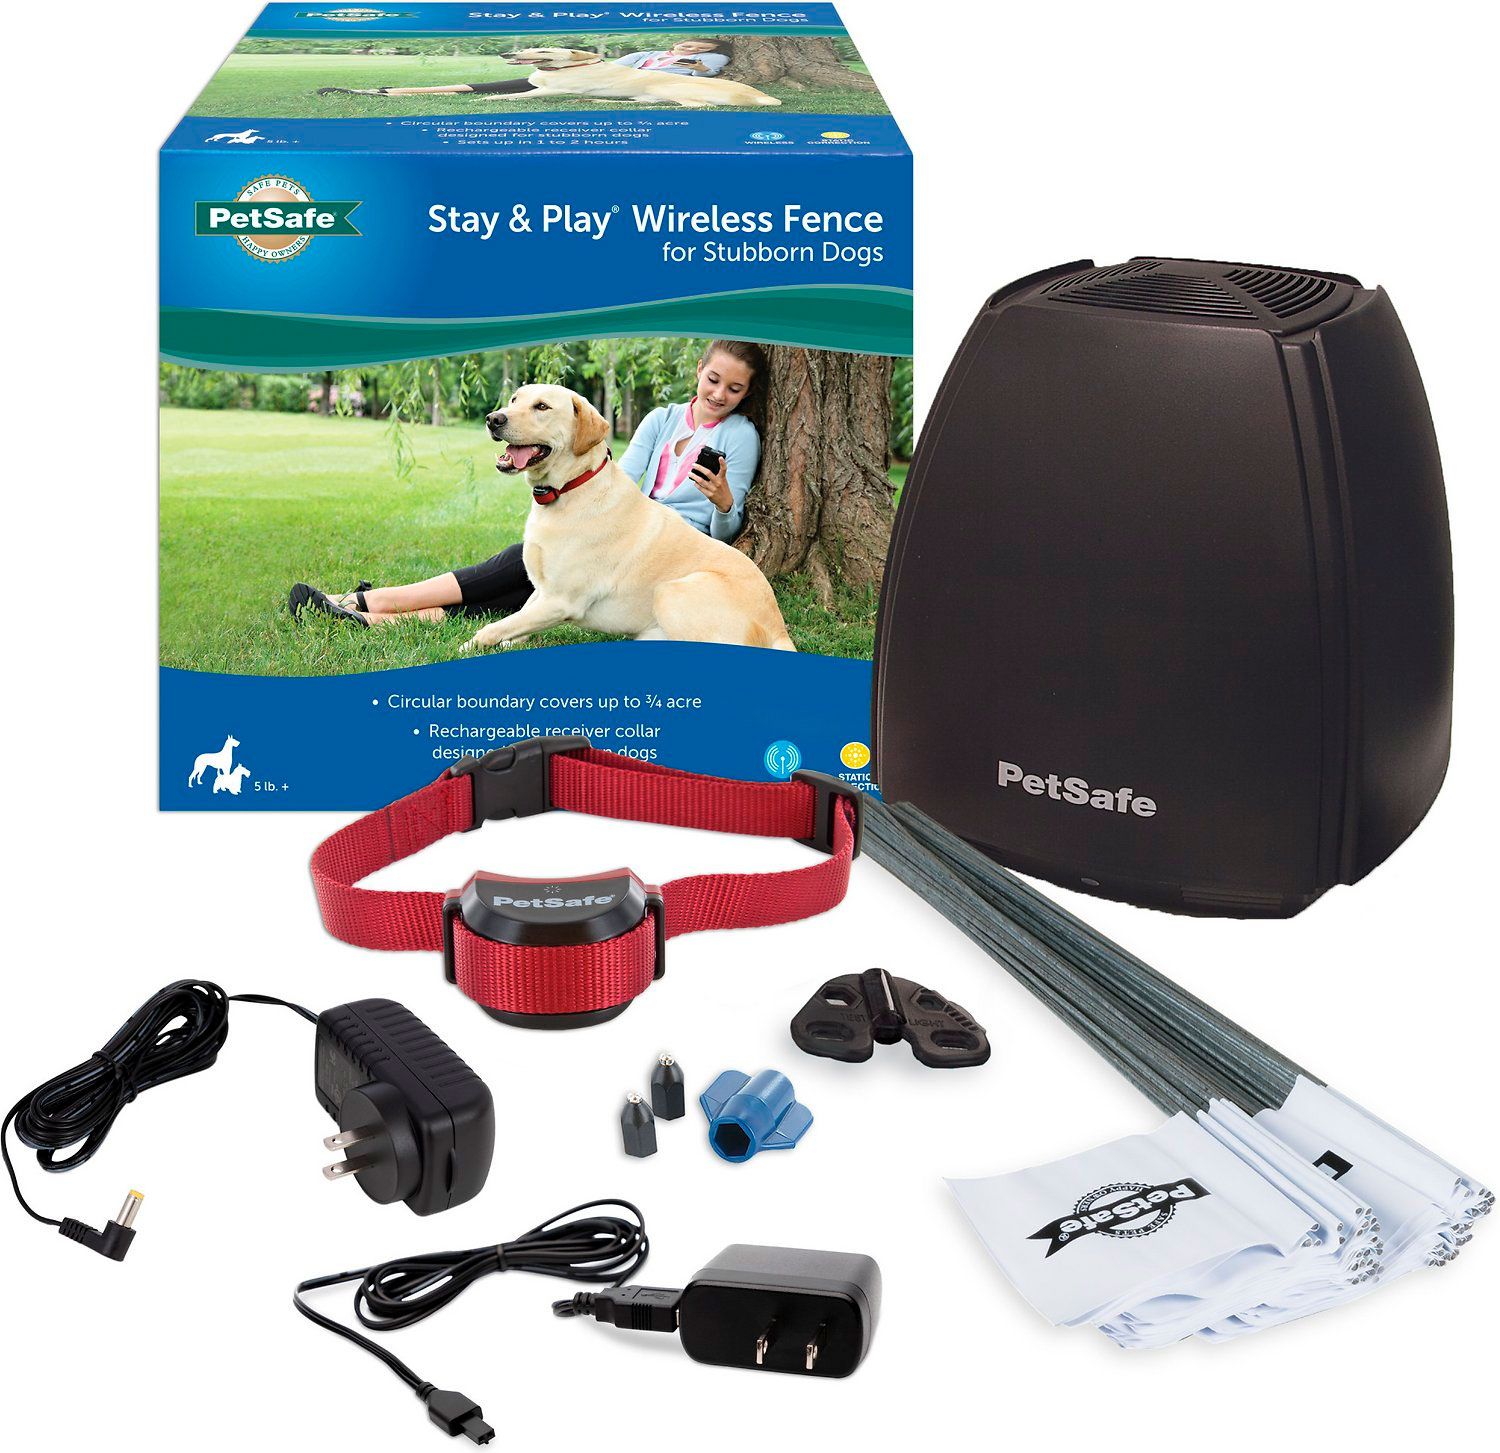 PetSafe Wireless Fence for Stubborn Dogs.